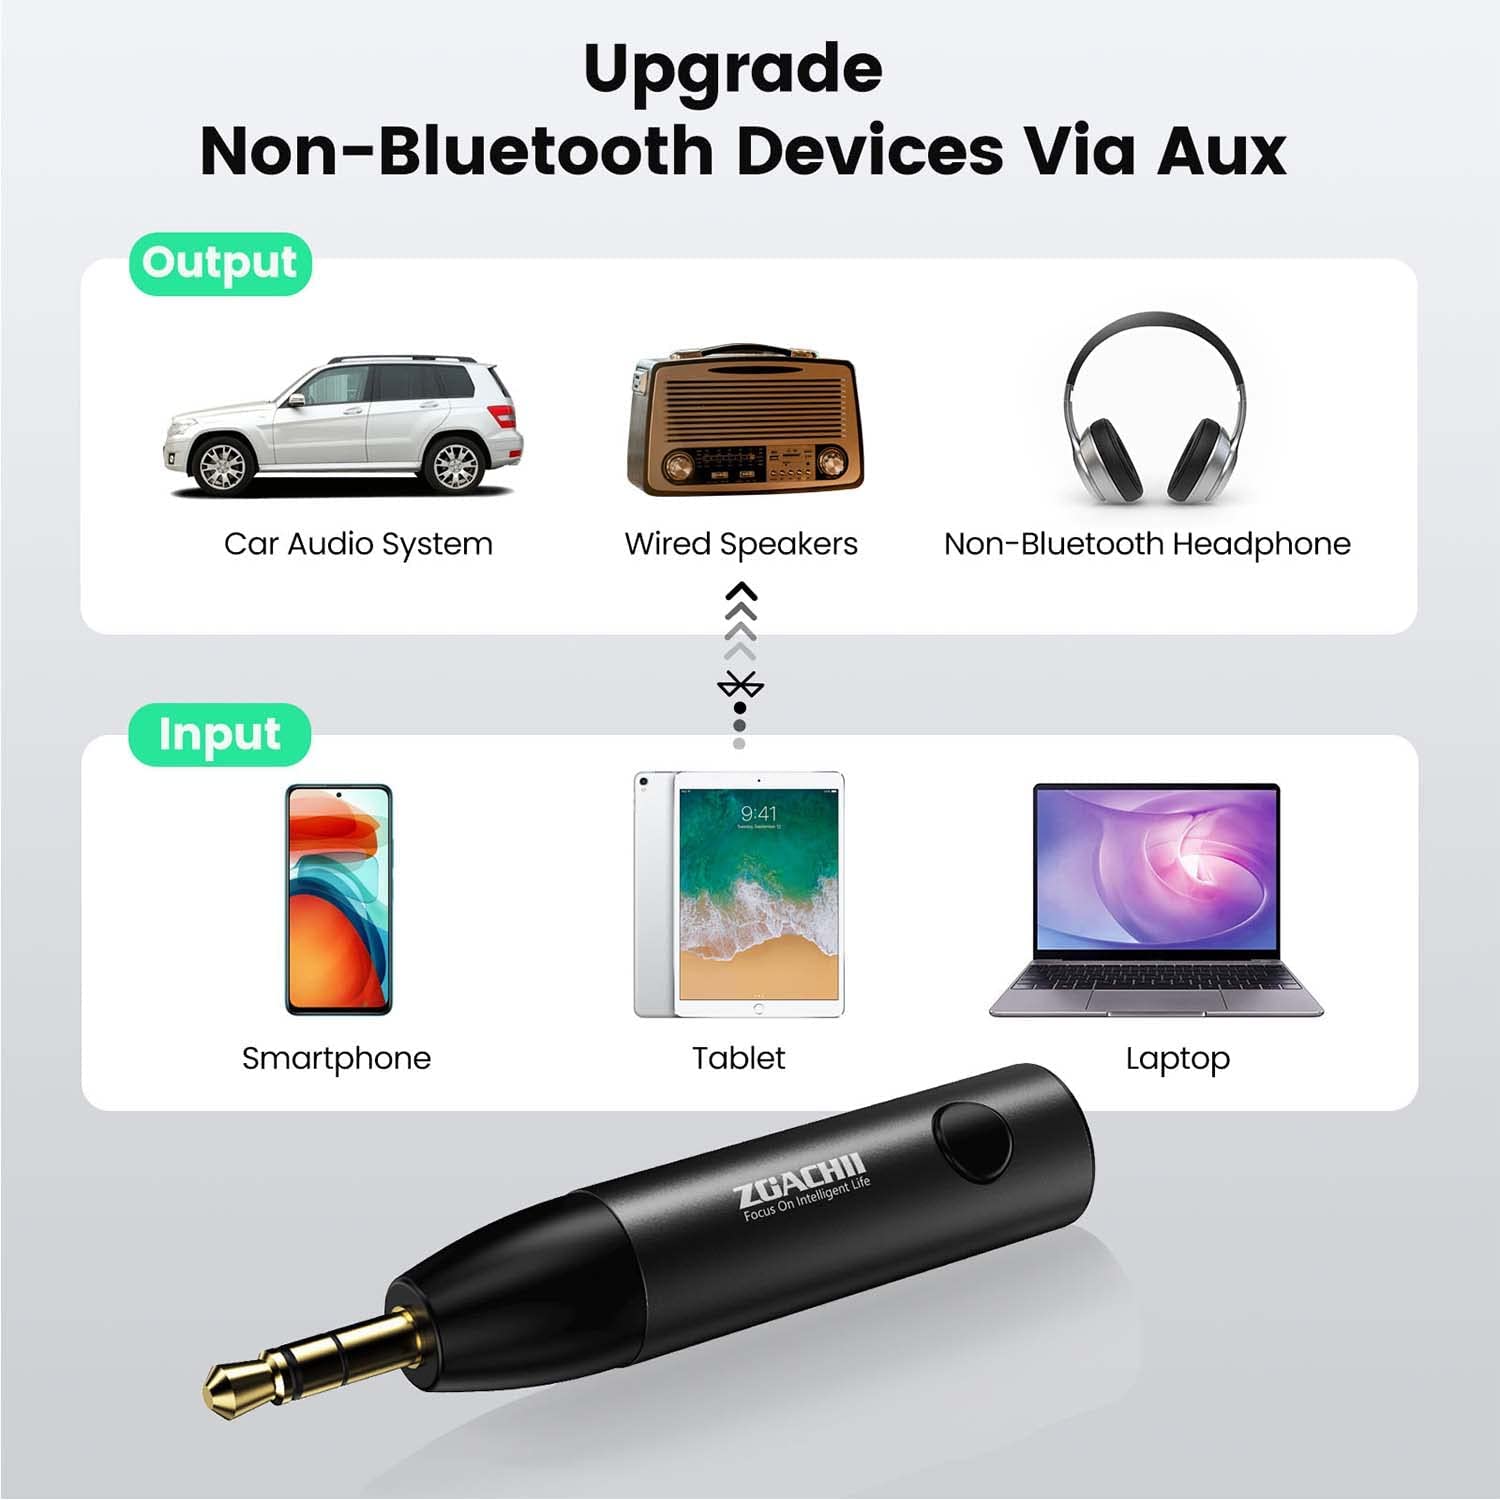 Bluetooth Aux Adapter for Car - ZOACHII Mini Wireless Audio Bluetooth 5.0  Receiver (HandsFree Call/Built in Mic) with 3.5mm Jack for Vehicle Truck